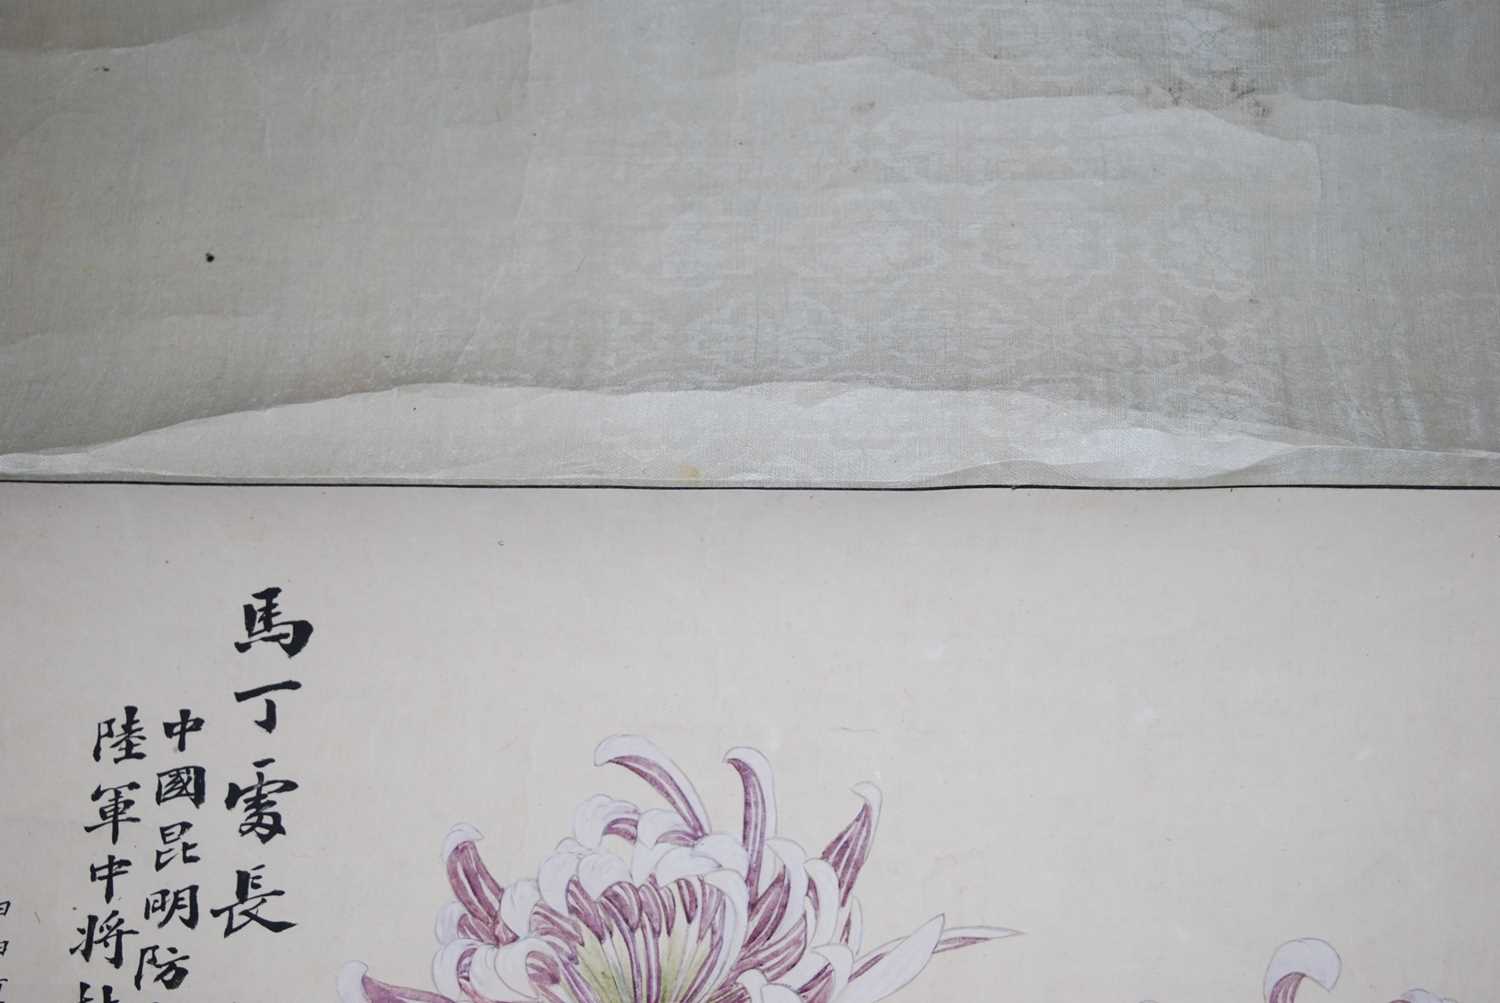 Yuan Yunyi (袁韻宜) (1920-2004) - Chrysanthemums, Republic of China scroll painting dated 1944, ink - Image 29 of 31